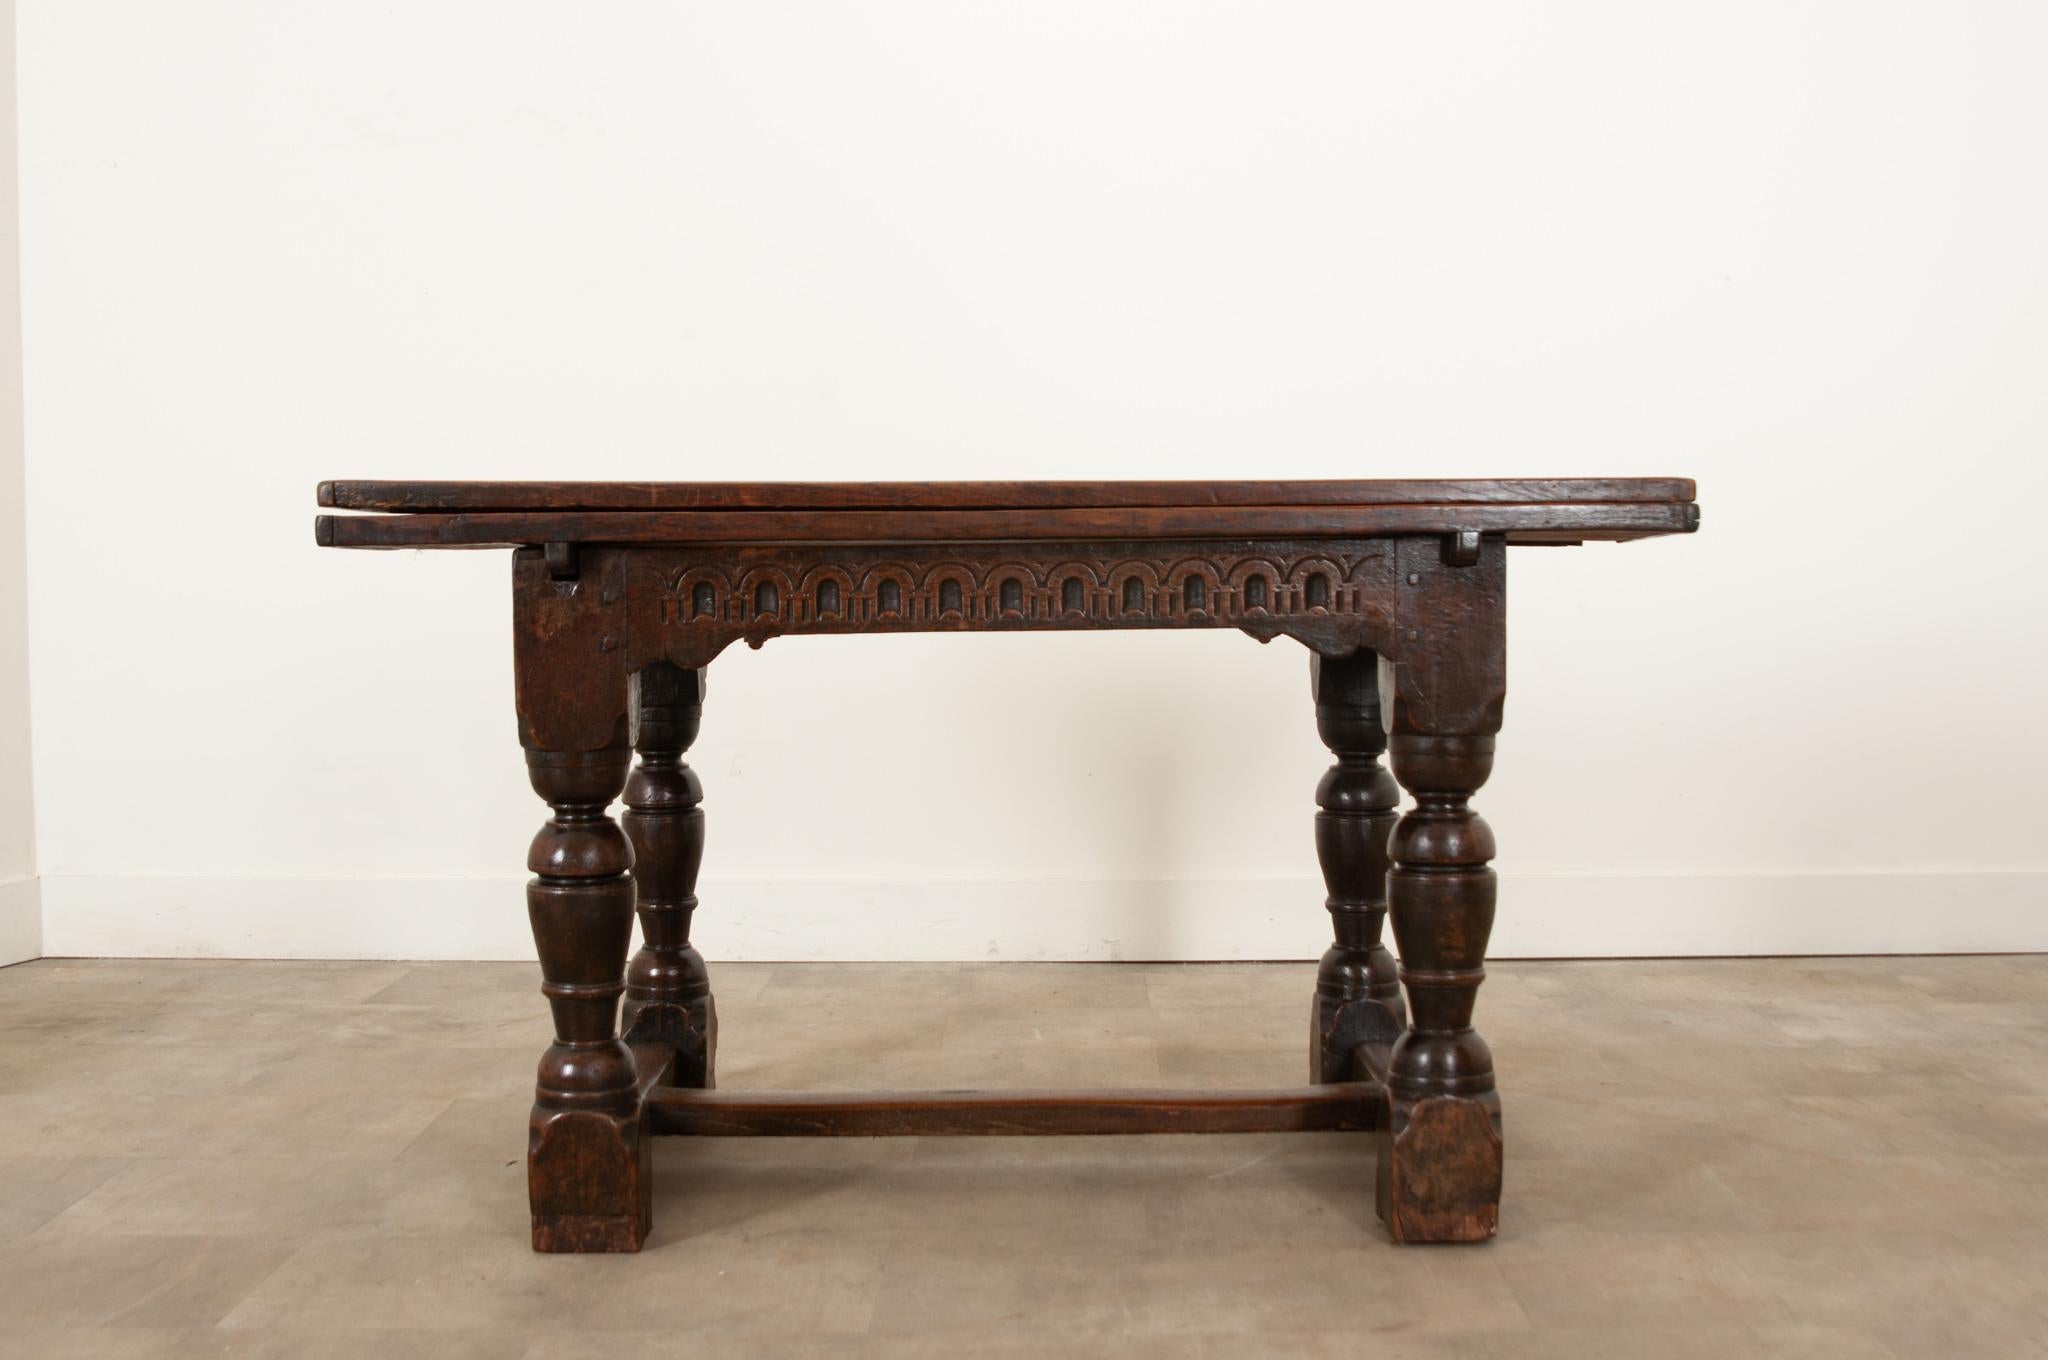 A robust, solid oak extending dining table hand-crafted in 17th century France circa 1680. Gnarled knots, beautiful grain, and an incredible range of textures give the thick tabletop its abundant character. The decorative hand-carved apron features